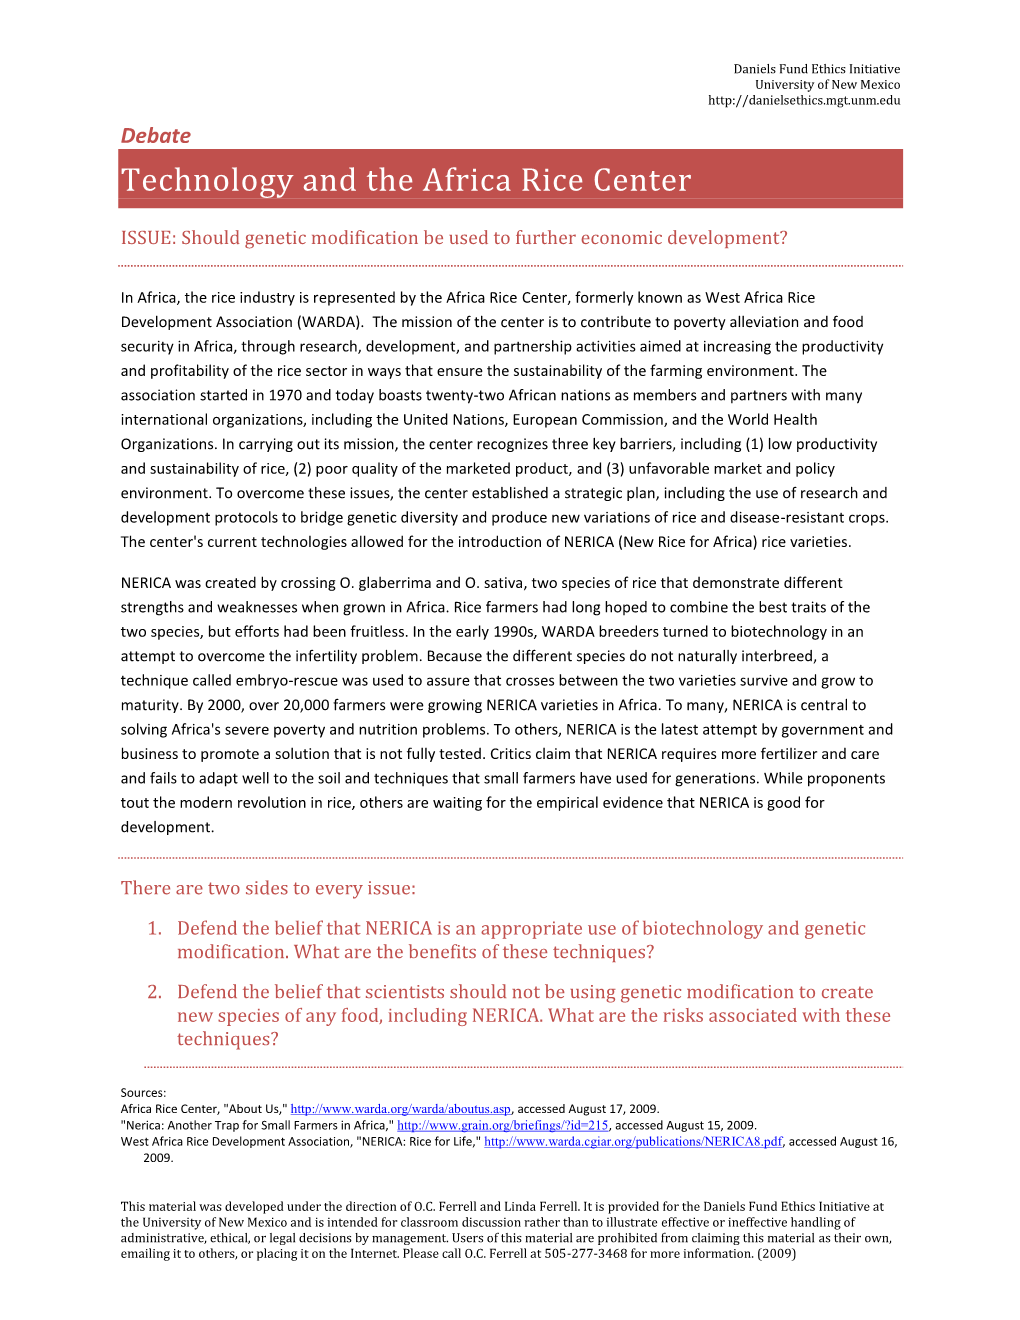 Technology and the Africa Rice Center